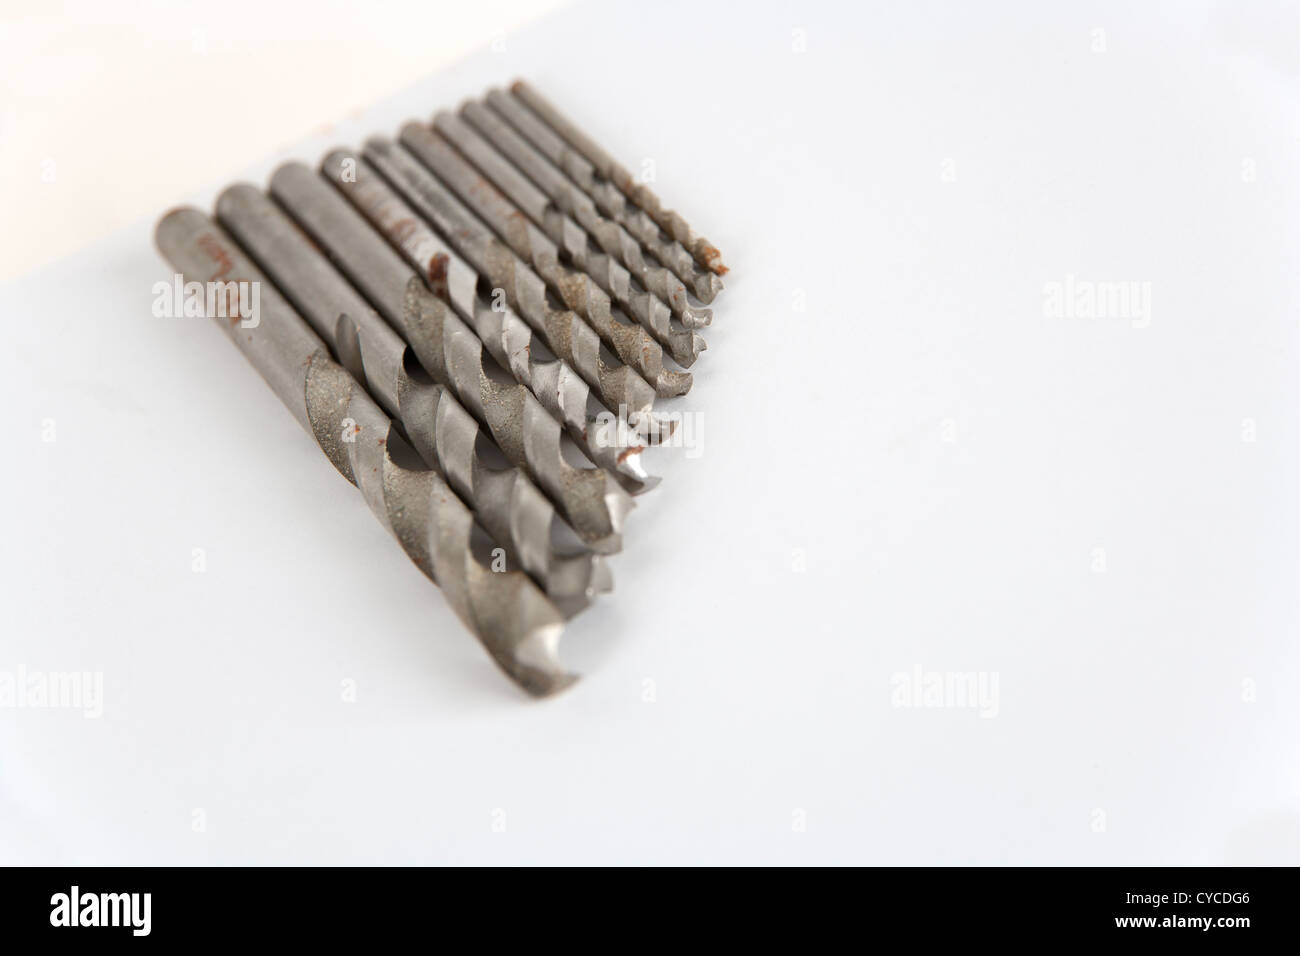 Well used and rust specked twist drill bits on white paper with copy space. Shallow depth of field. Stock Photo